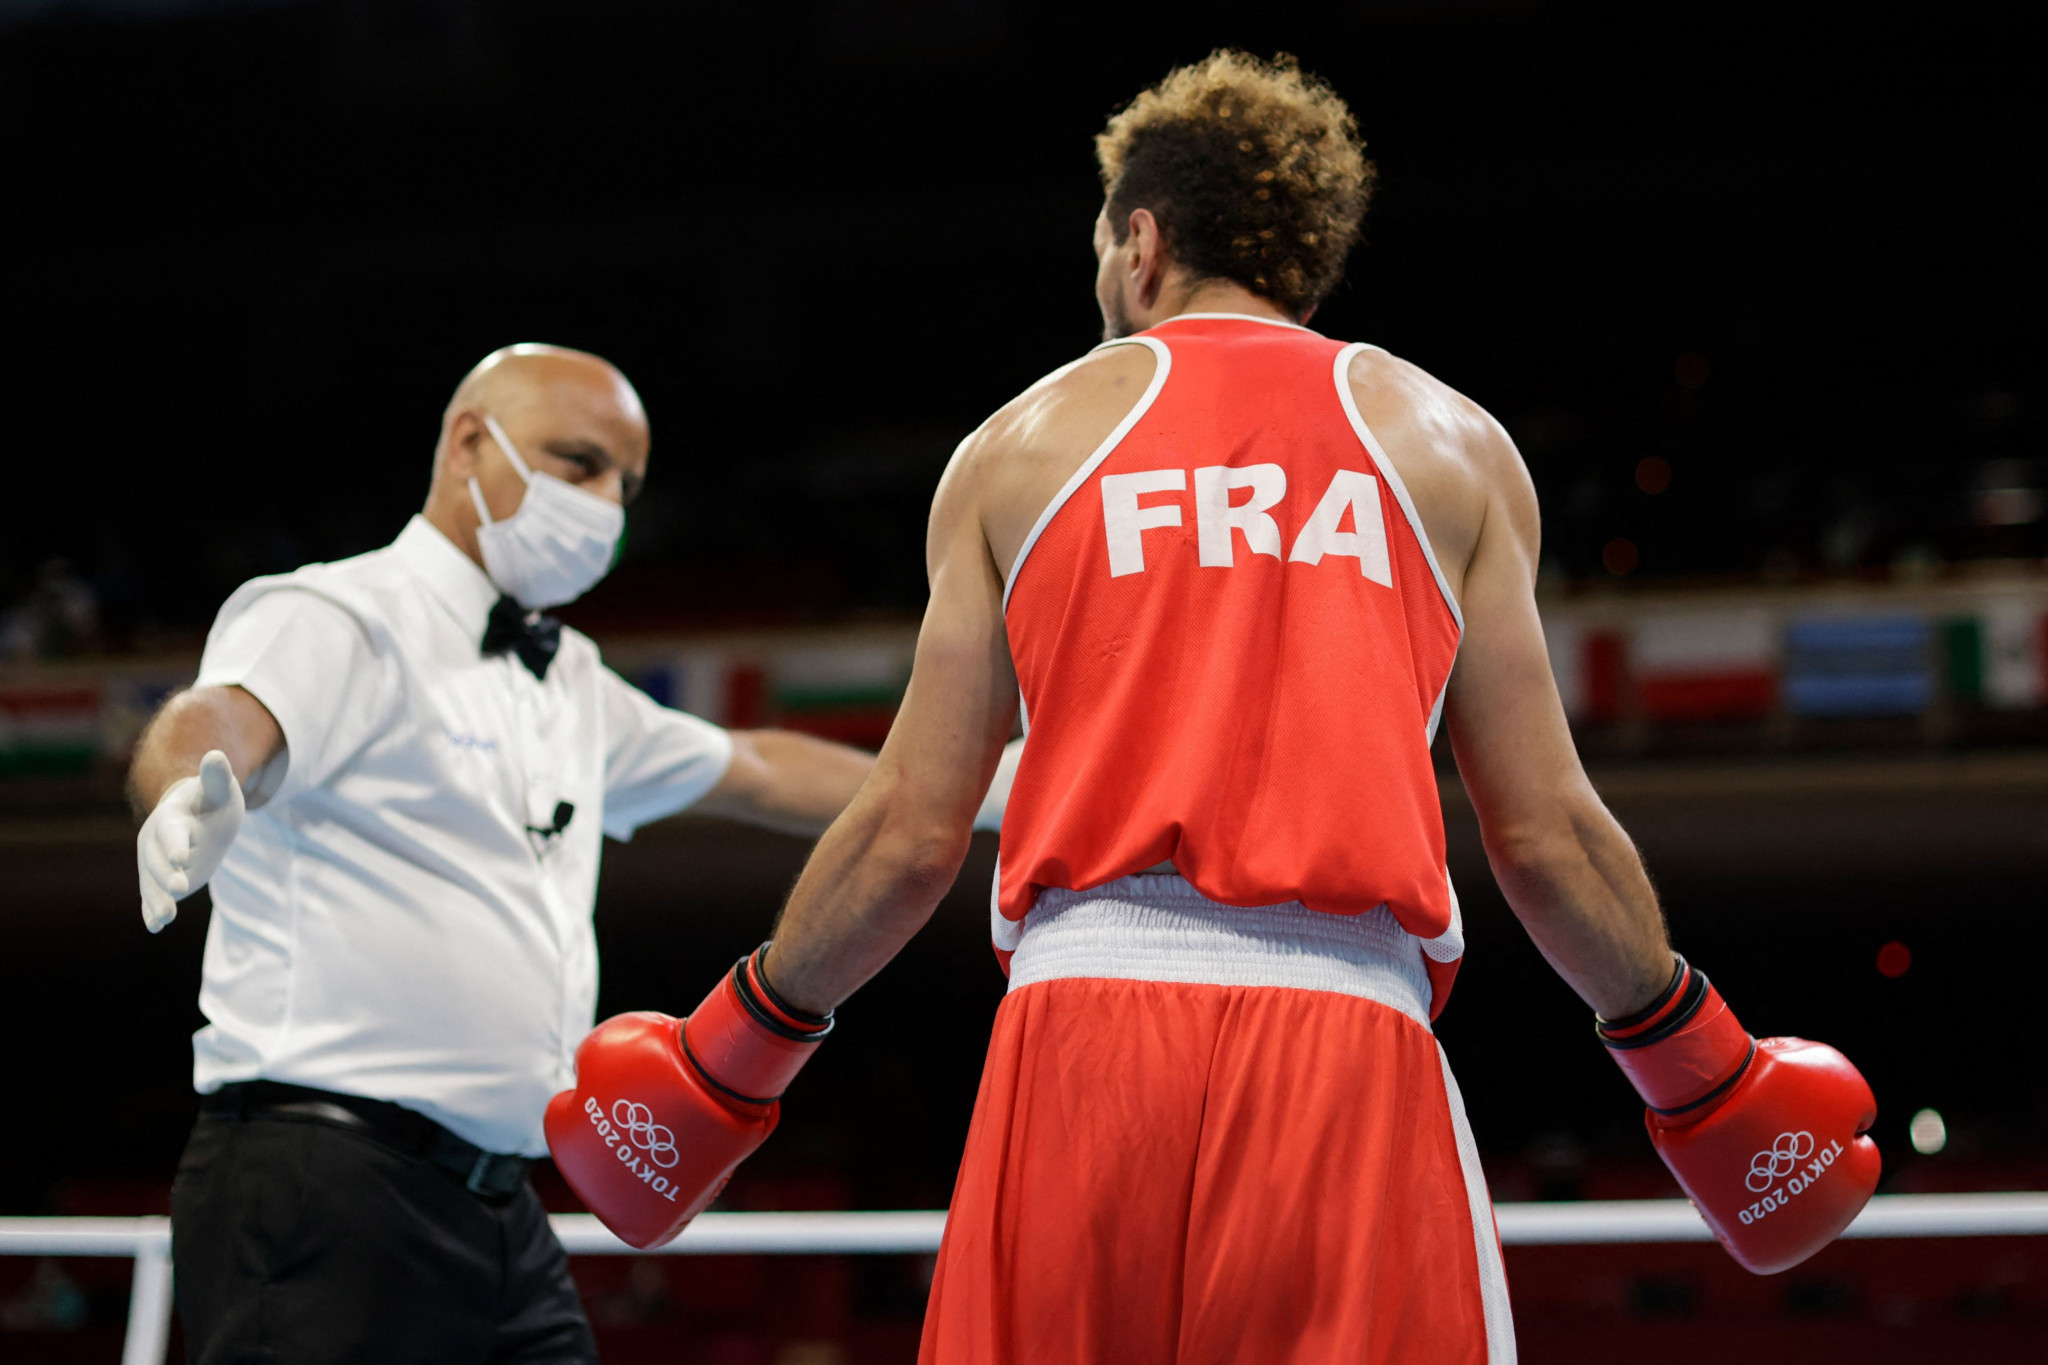 The bout review rule has been reintroduced by IBA ©Getty Images